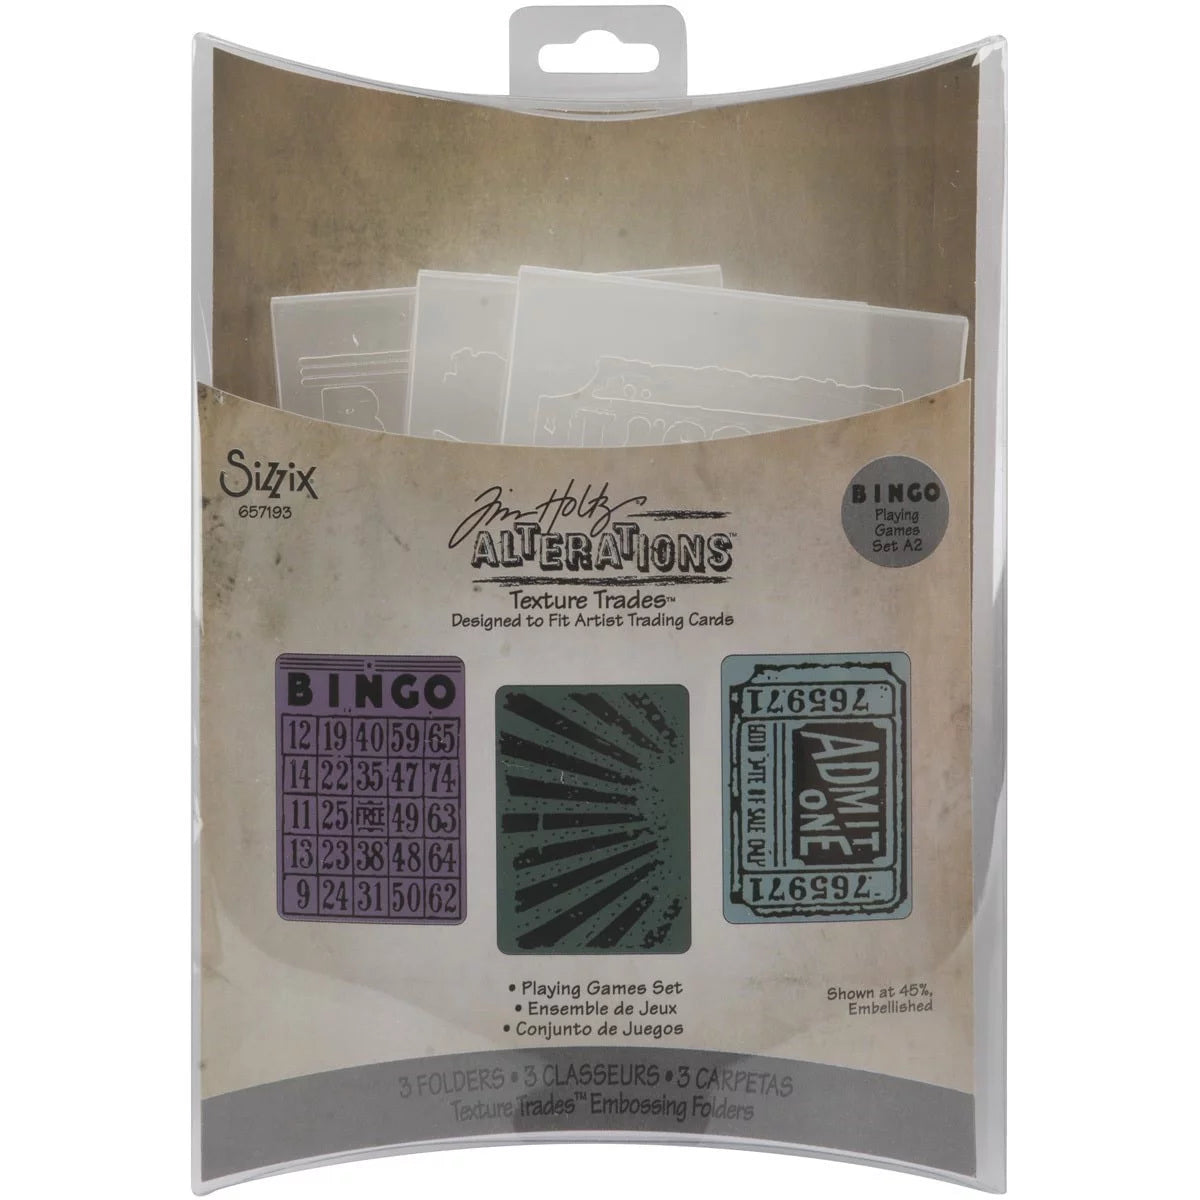 Tim Holtz Alterations: Embossingfolders - Playing Games Set